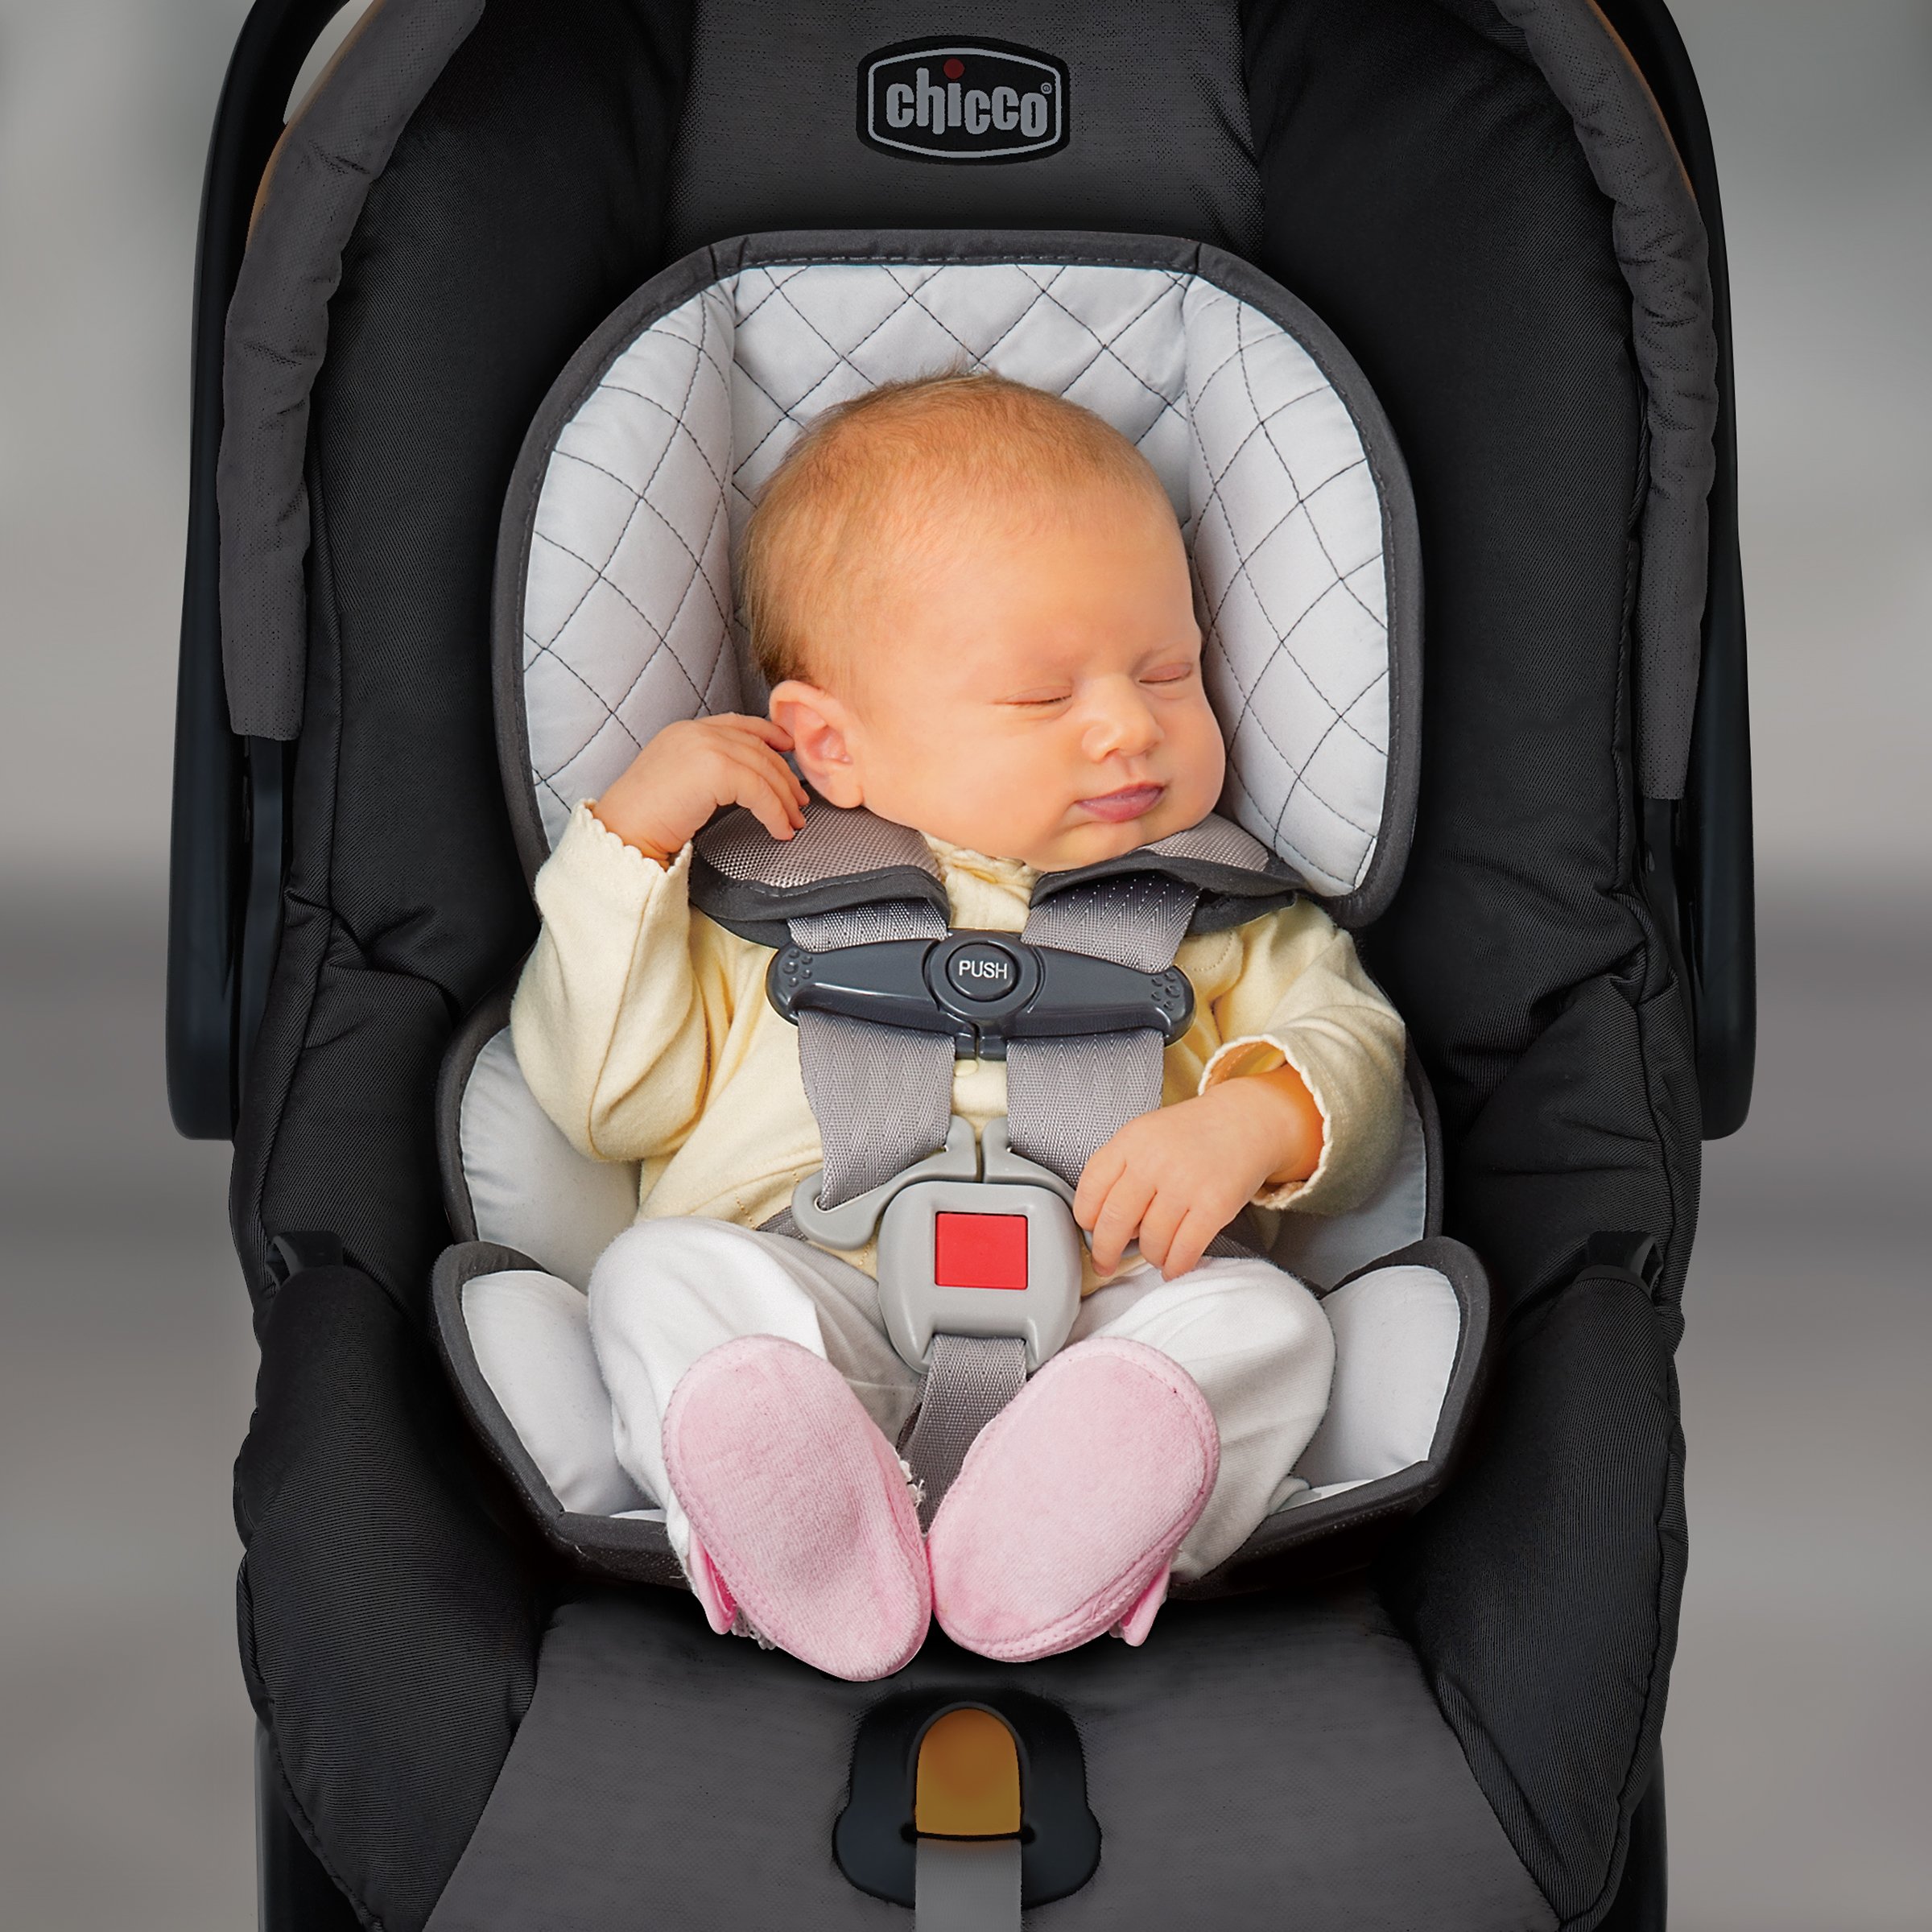 Chicco KeyFit 30 Infant Car Seat and Base | Rear-Facing Seat for Infants 4-30 lbs.| Infant Head and Body Support | Compatible with Chicco Strollers | Baby Travel Gear